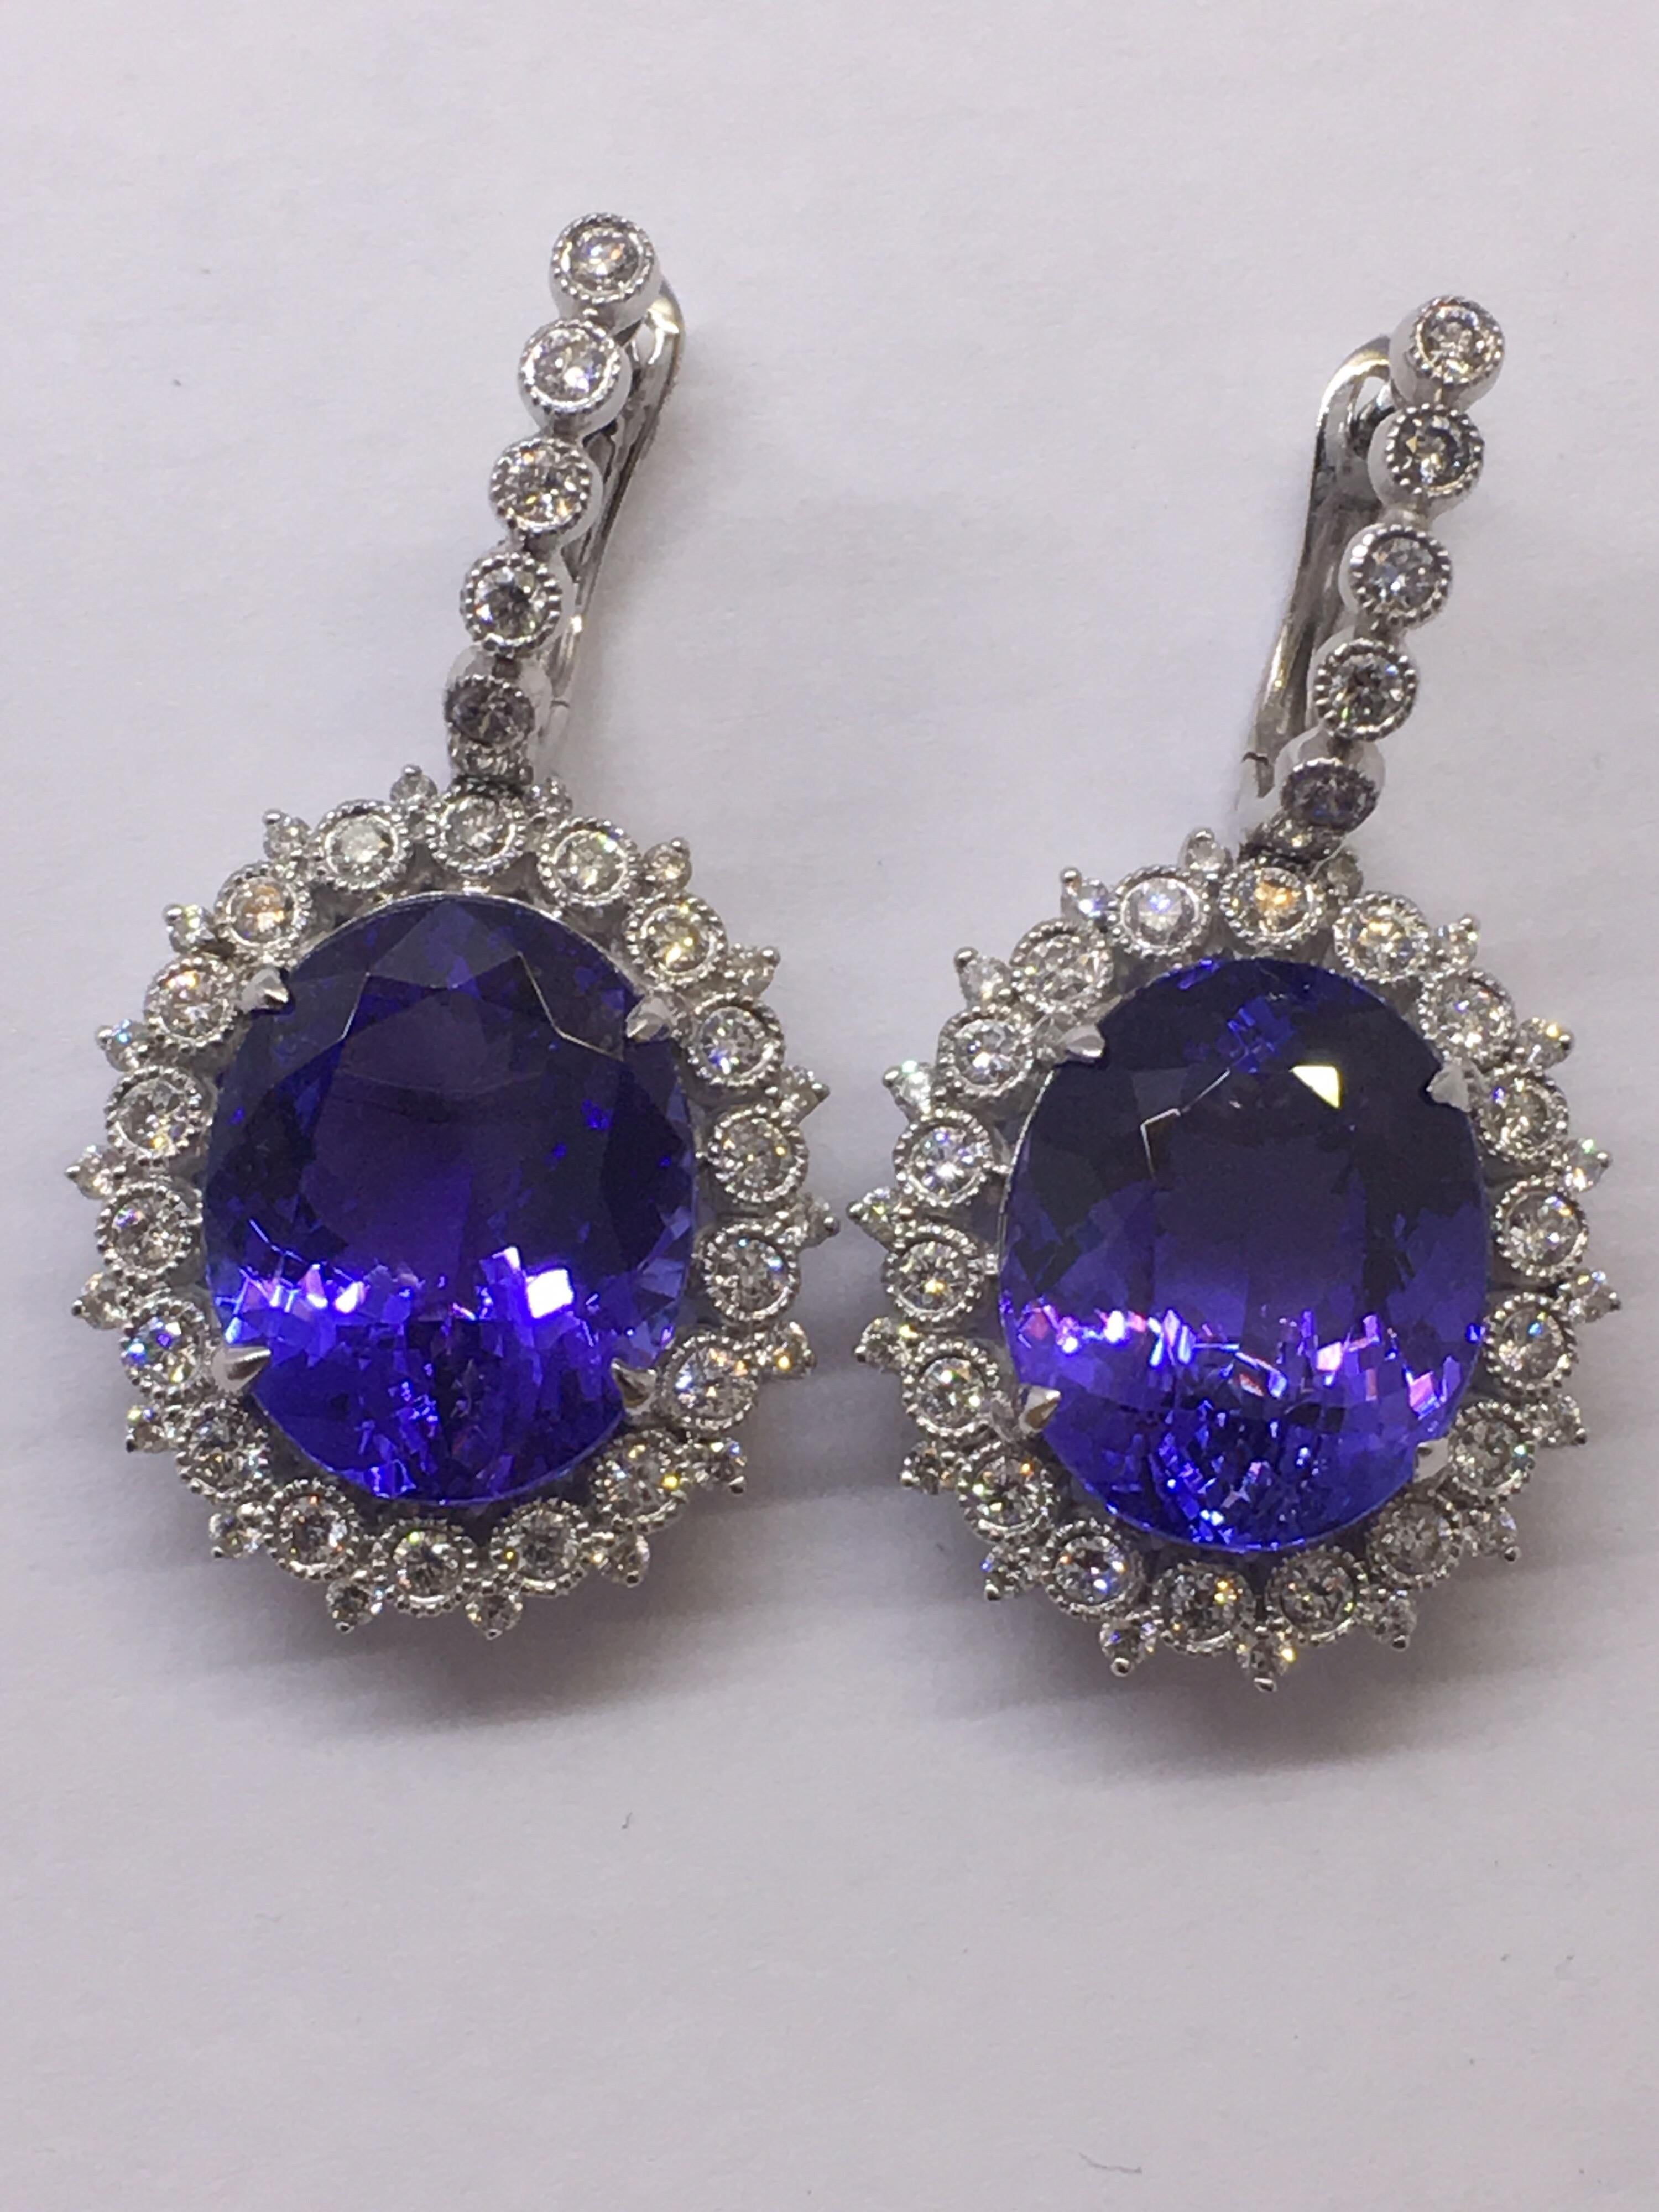 Natural Oval Tanzanite and Diamonds Earrings is set in 14K white Gold.
Total weight of Tanzanite is 16.90 Carat and Total Diamond is 1.18 Carat. The earring is for Pierced ears.
Quality of Tanzanite is AAA Royal Blue with Purple tone.
